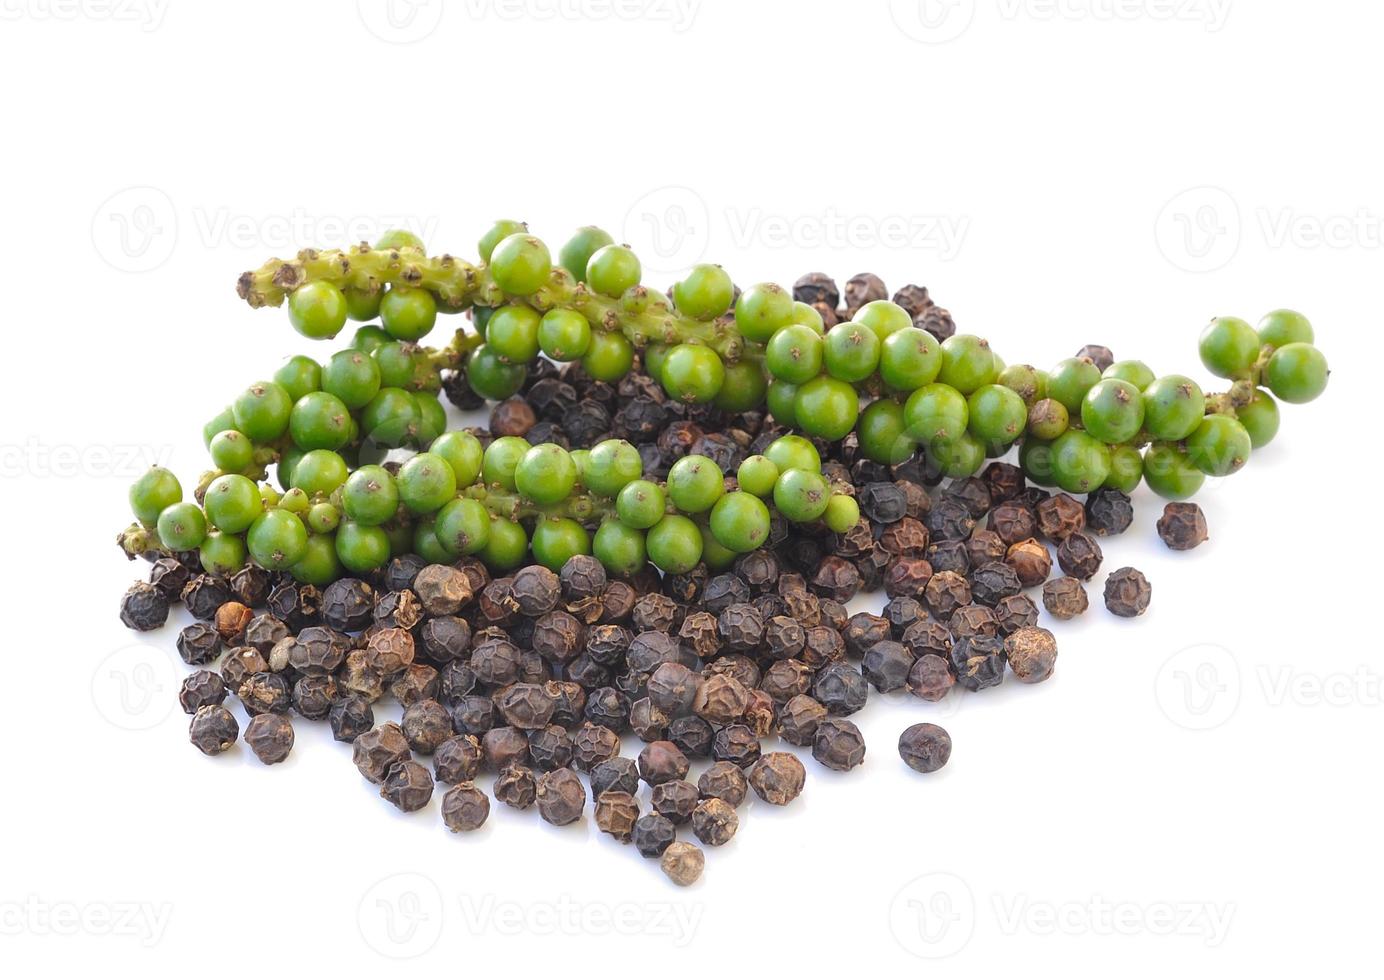 Black peppercorn and Bunches of fresh green pepper isolated on white background photo